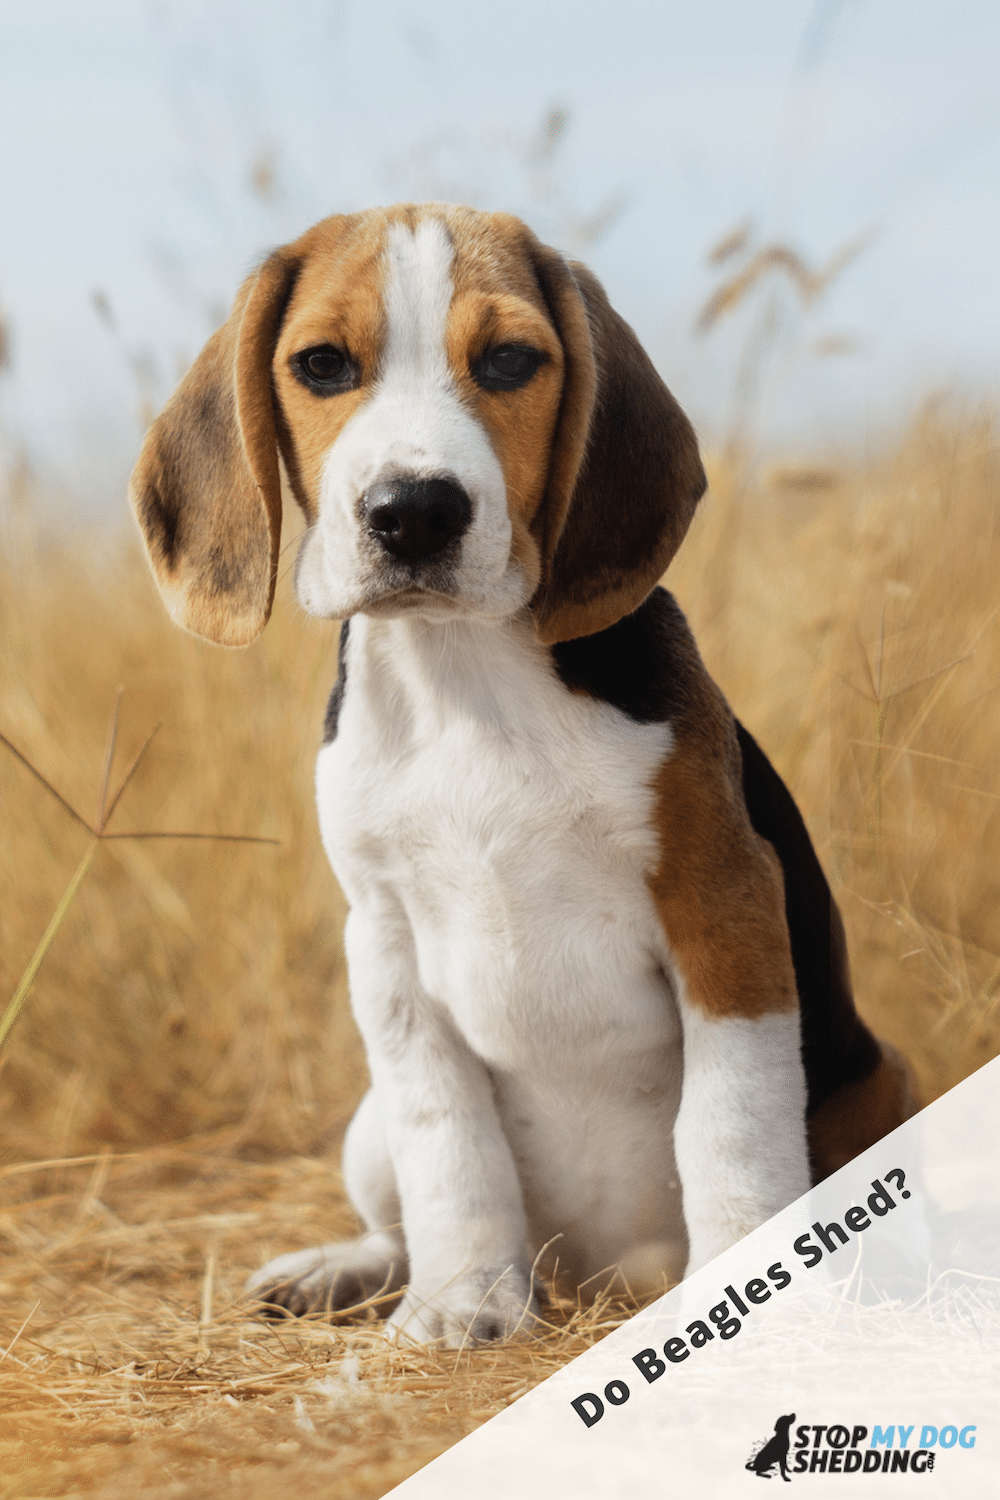 Do Beagles Shed Much? (Shedding Guide)